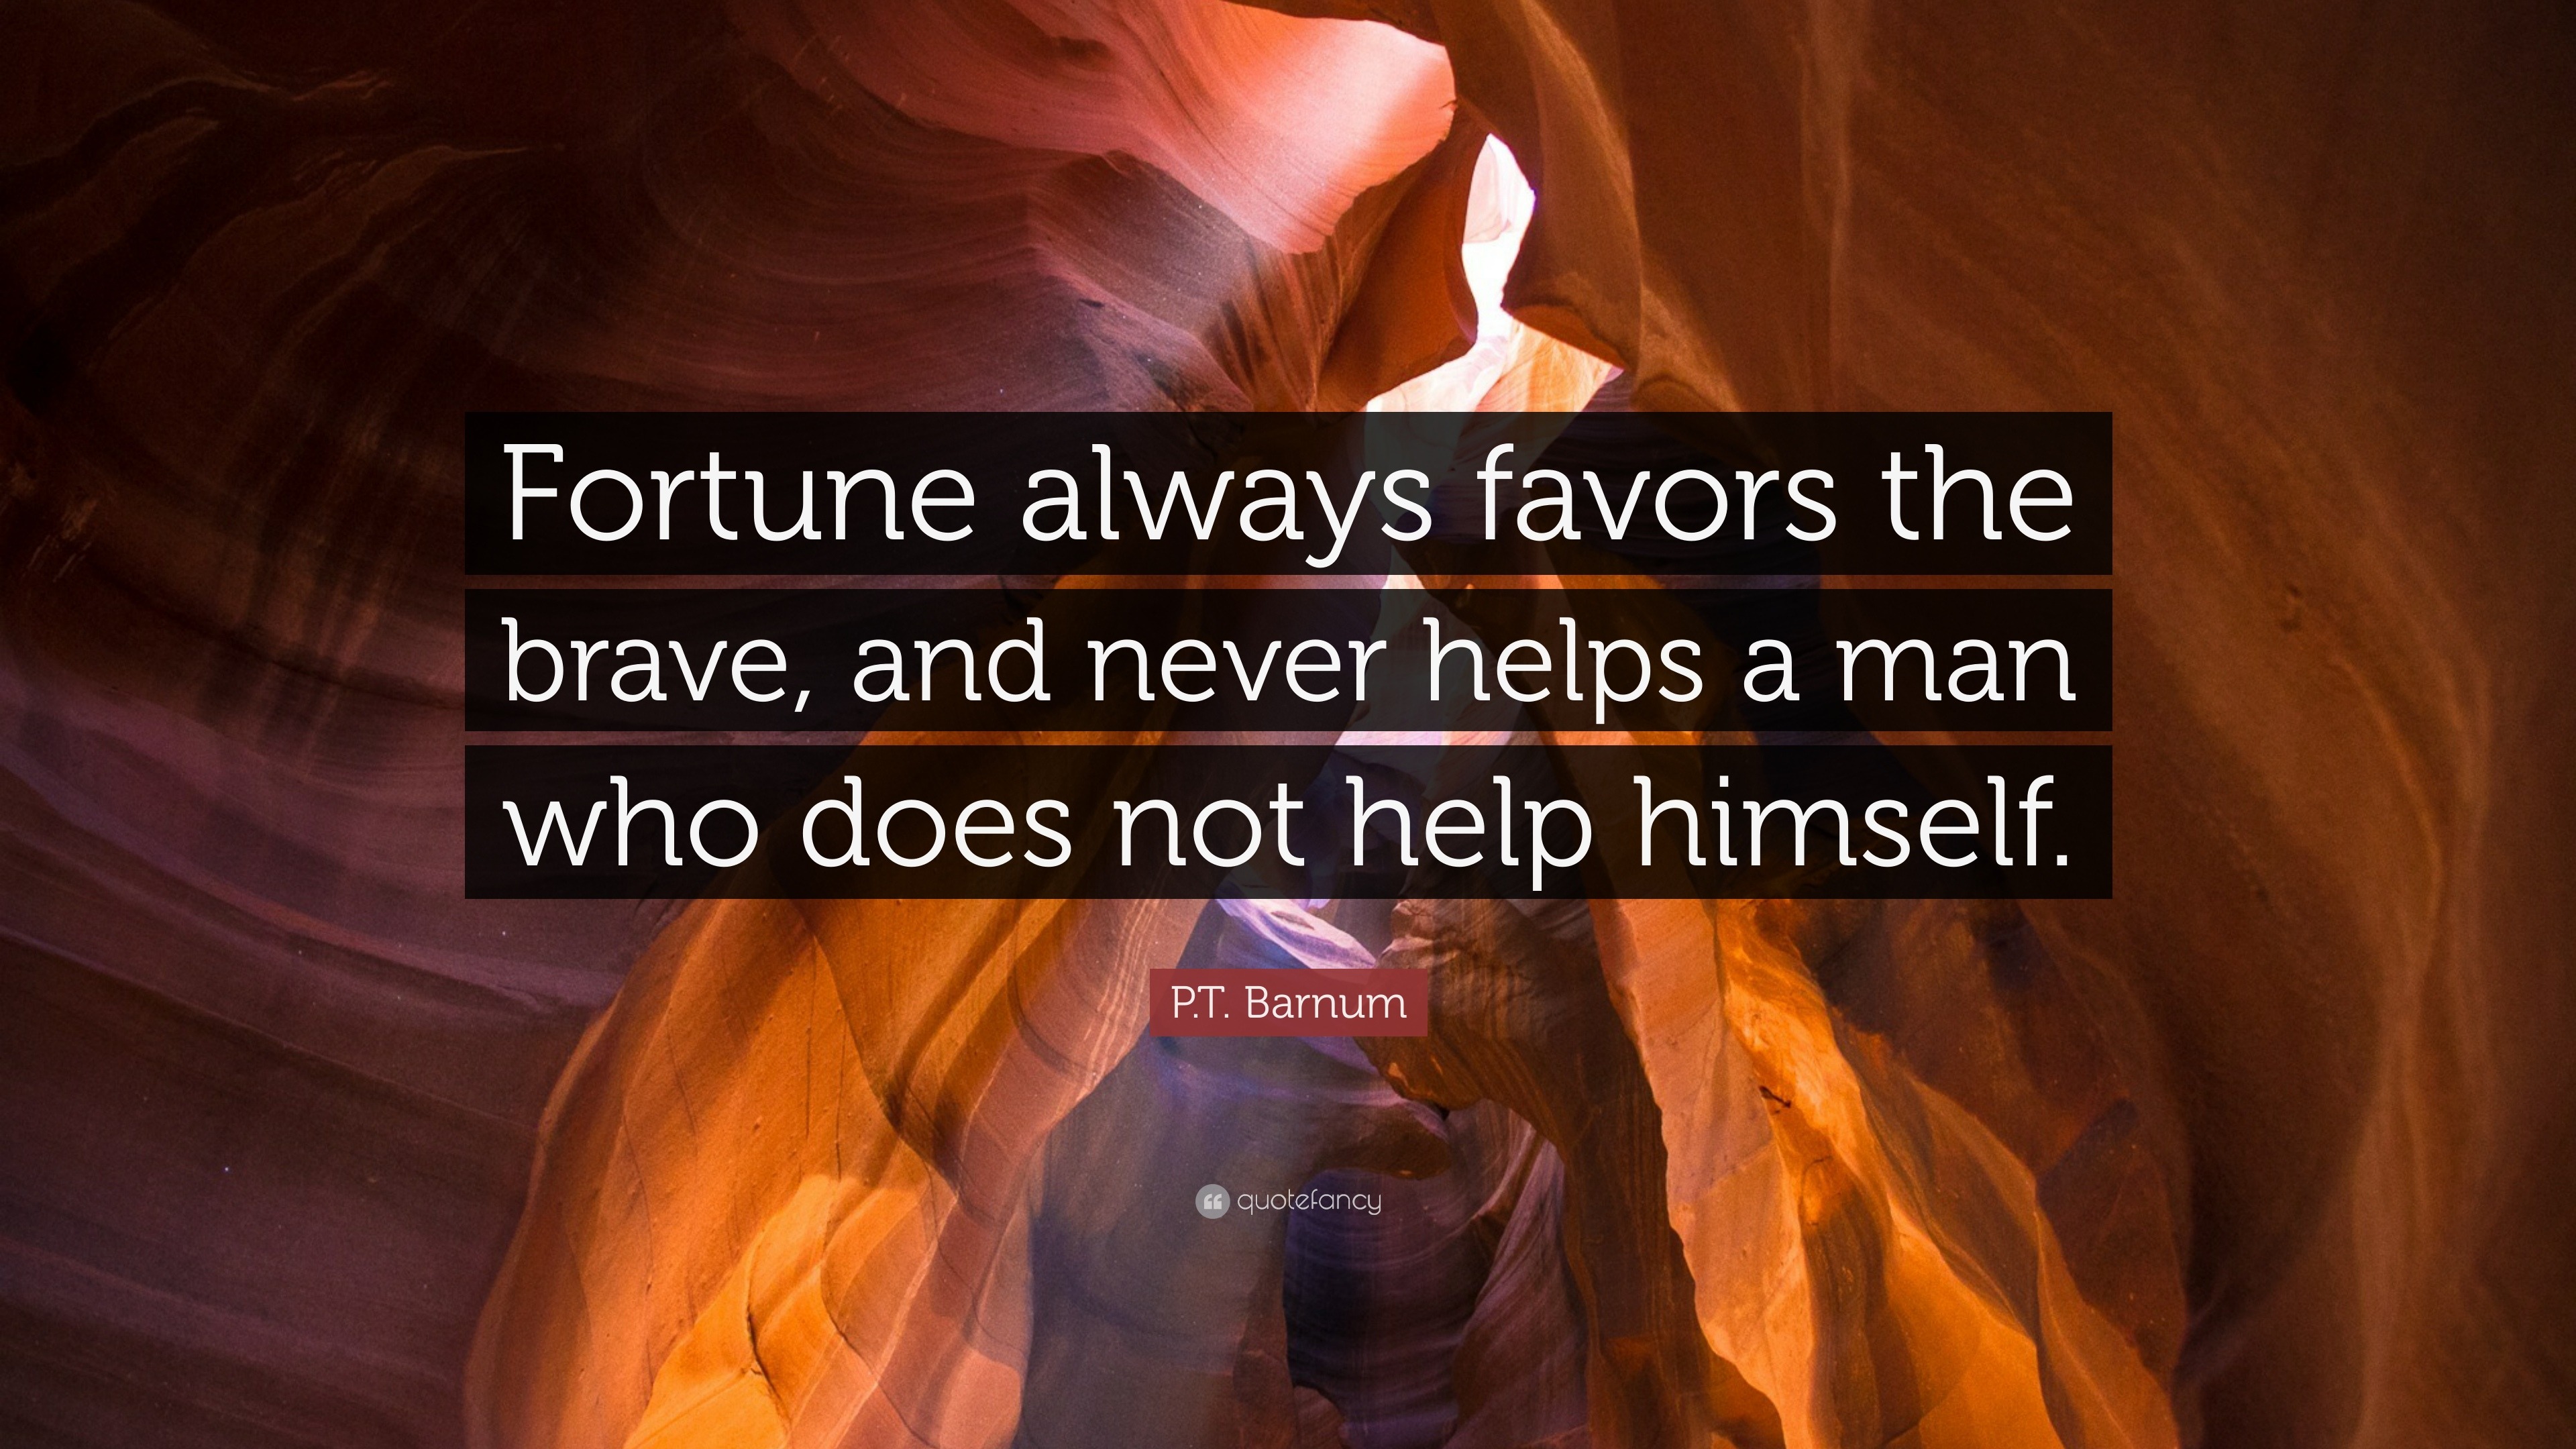 P.T. Barnum Quote: “Fortune always favors the brave, and never helps a